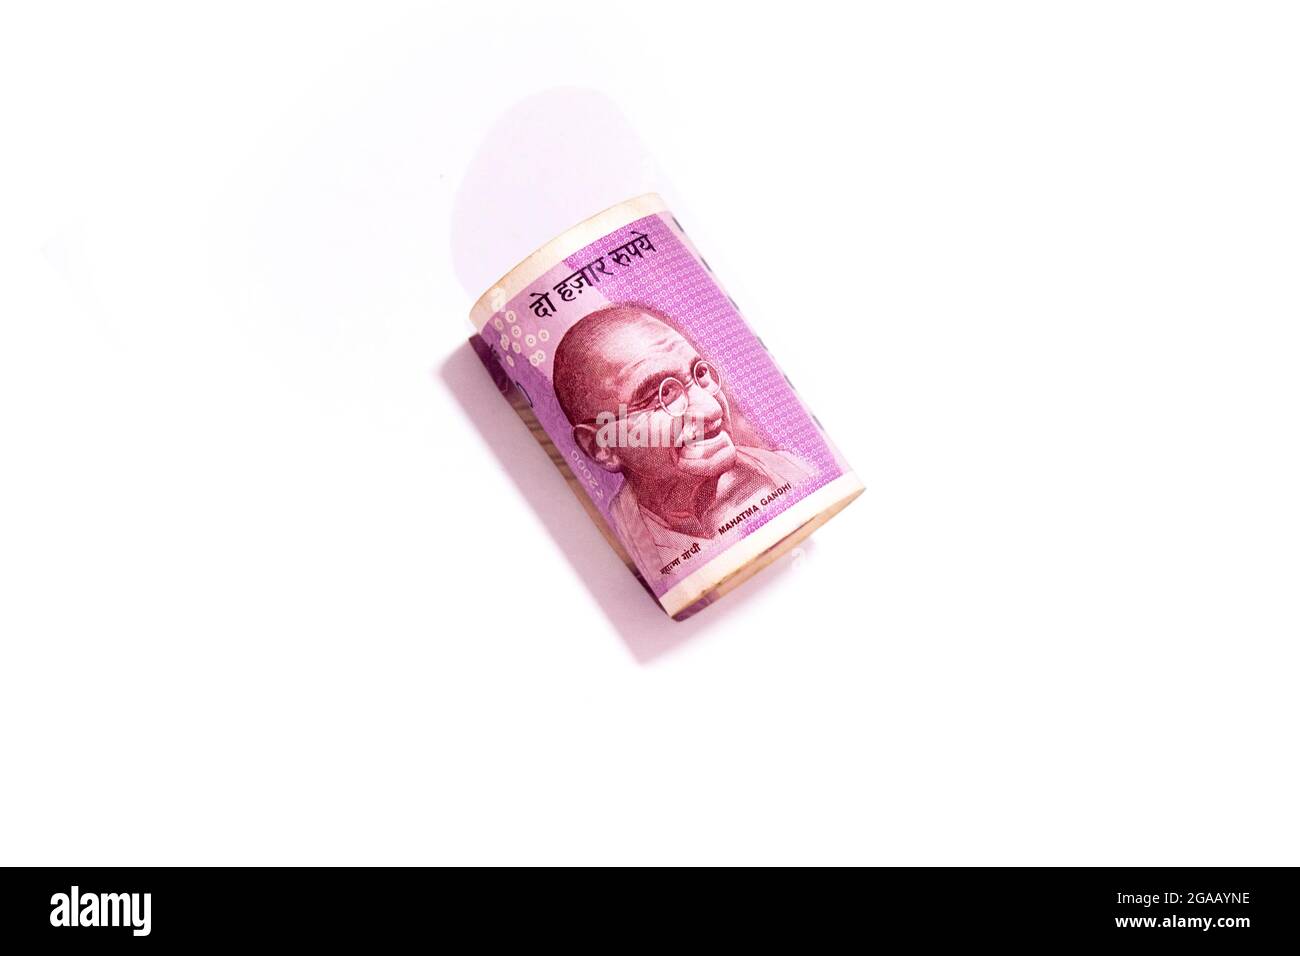 Mahatma Gandhi portrait in Indian two thousand rupees rolled up banknote isolated on white background. Stock Photo